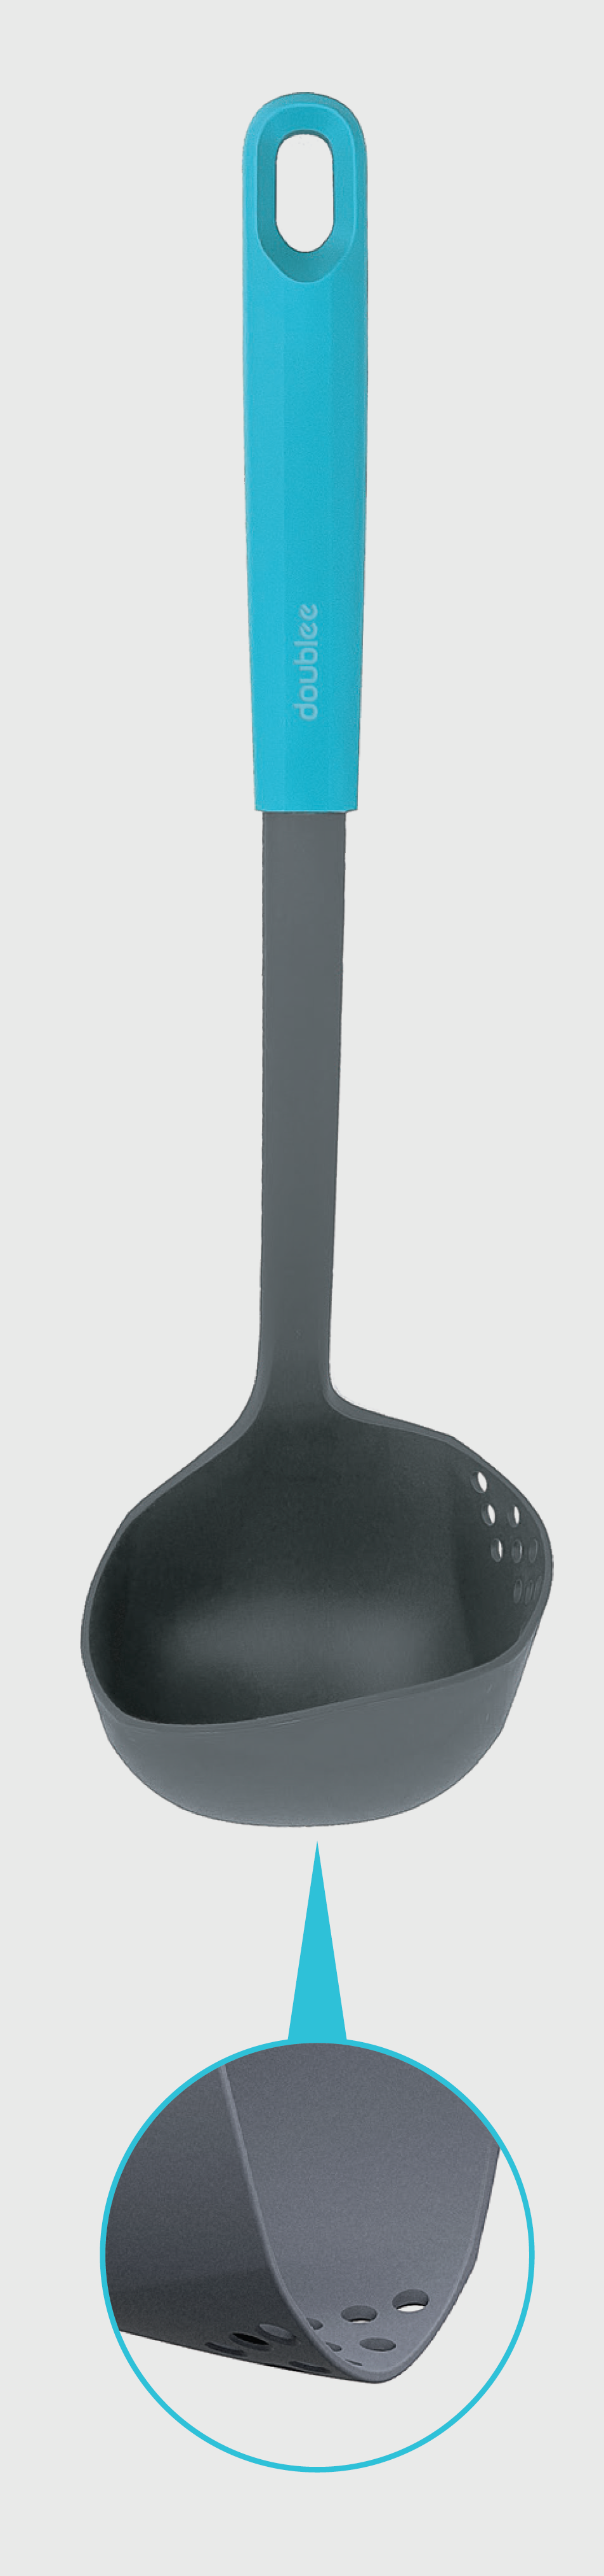 2-in-1 Slotted Ladle By Doublee